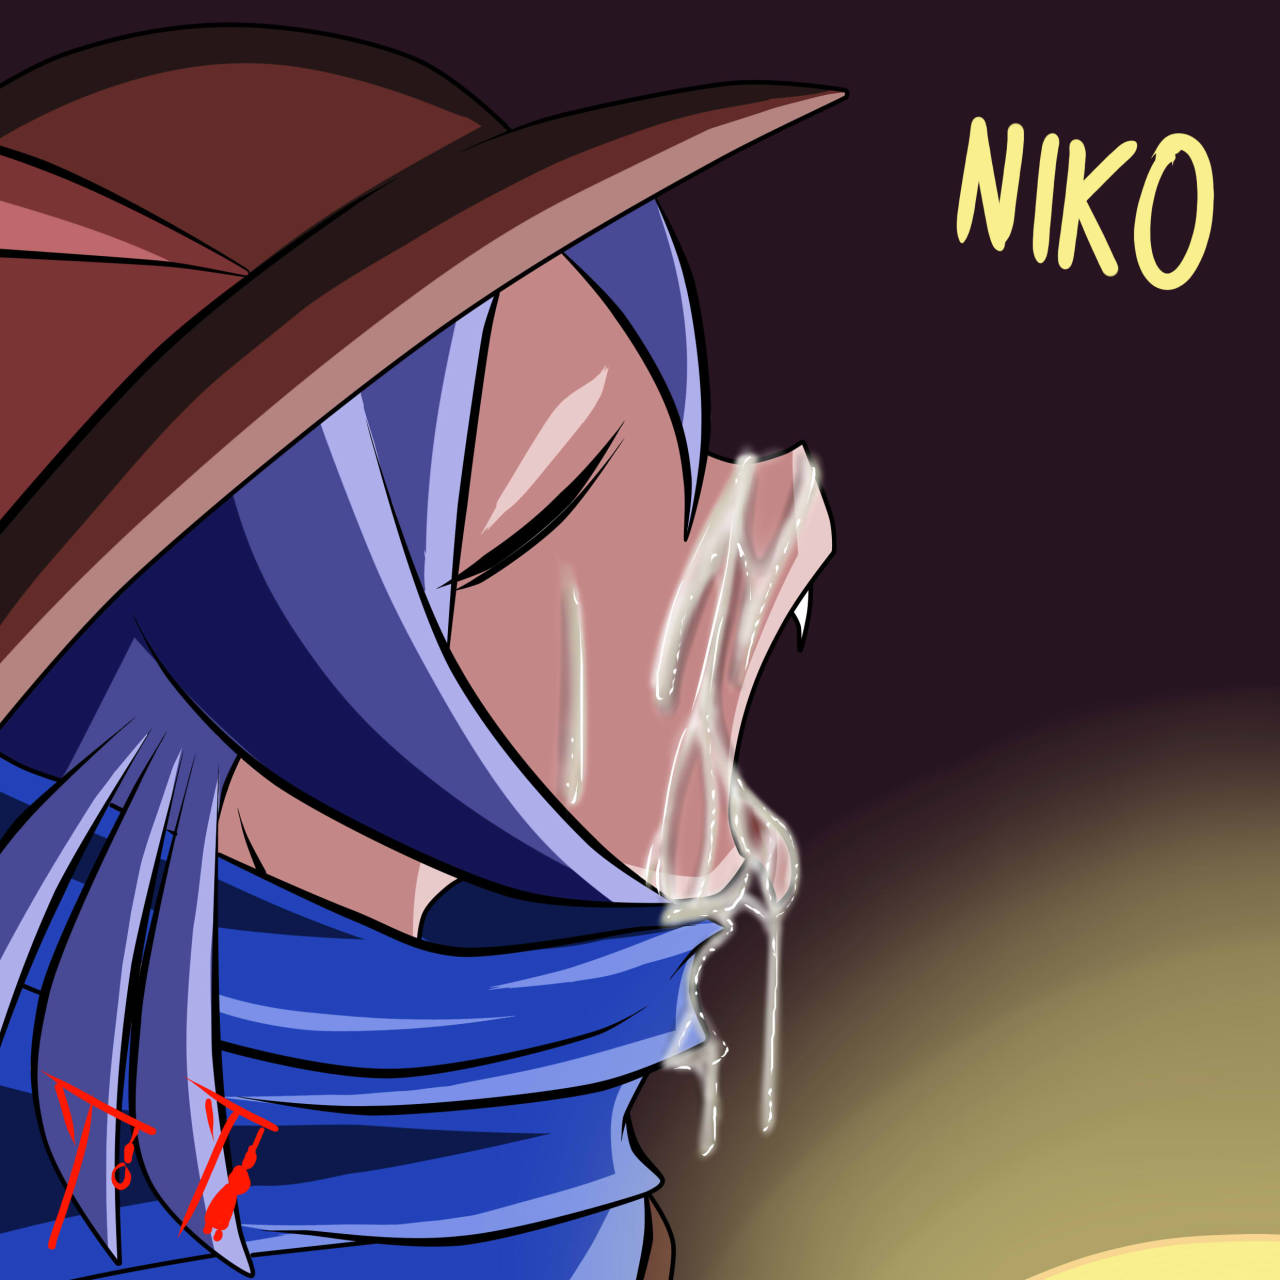 well i guess niko kinda adoreable. not to mention its gender neutral. so it can be